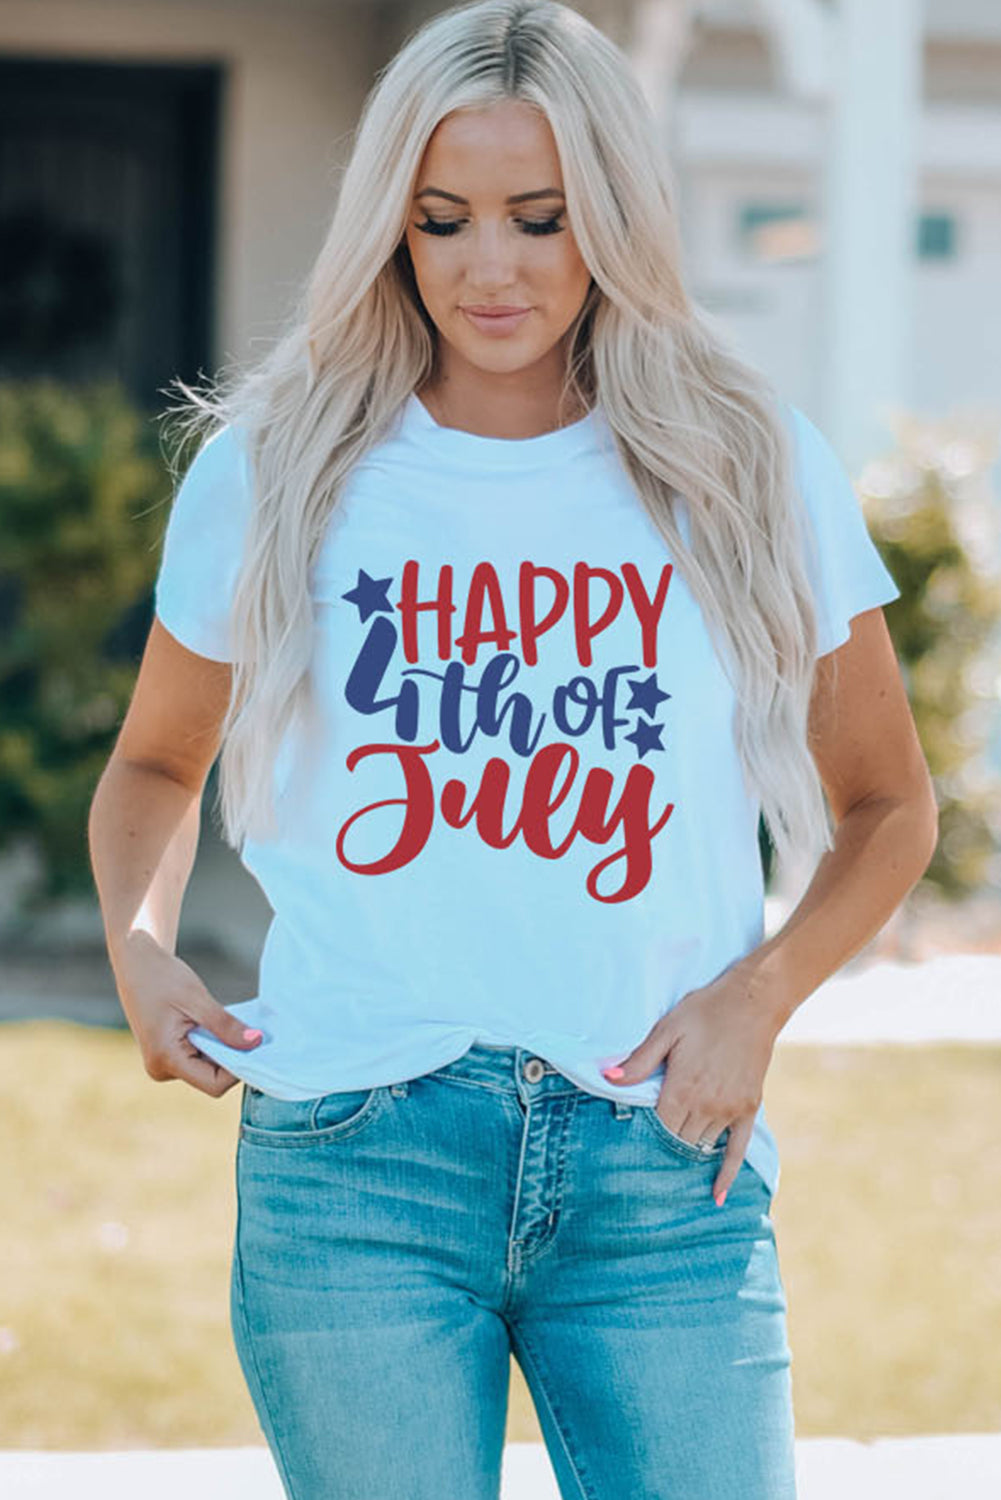 White HAPPY 4th OF JULY Printed Family Matching Graphic Tee Family T-shirts JT's Designer Fashion